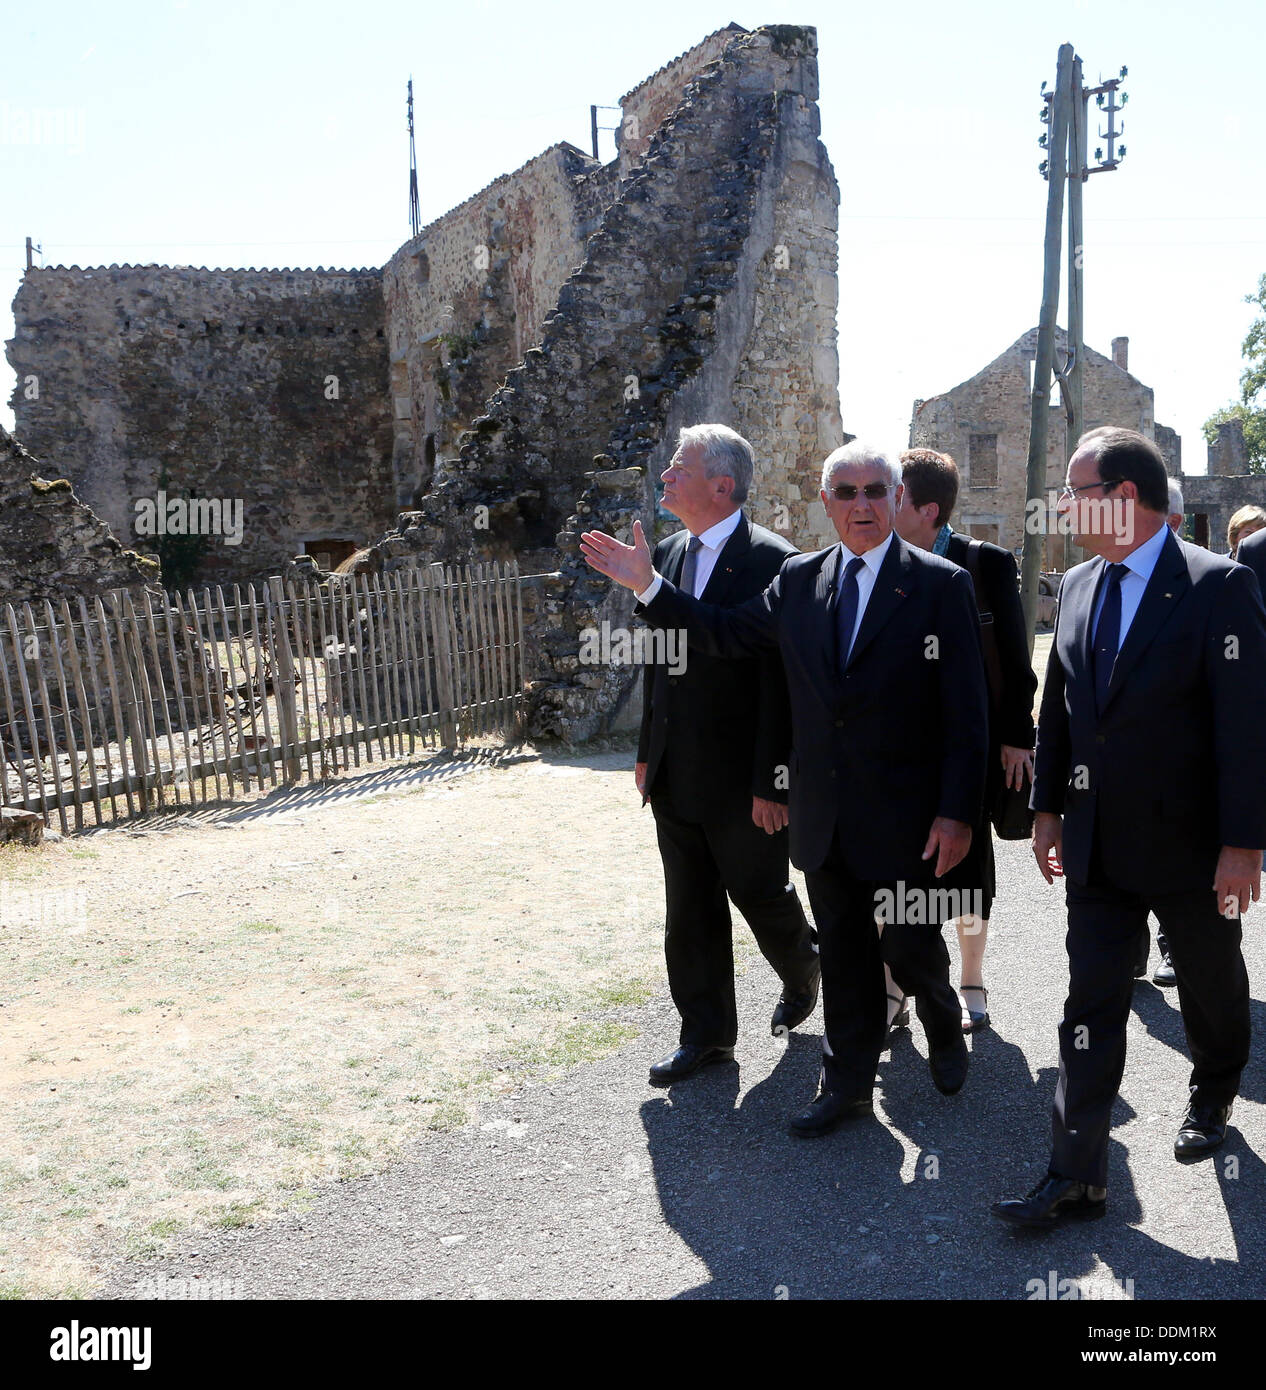 Oradour-sur-Glane, France. 04th Sep, 2013. German President Joachim Gauck (L), French President Francois Hollande (R) and survivor of the massacre in Oradour-sur-Glane during World War II Robert Hebras are pictured at the memorial site in Oradour-sur-Glane, France, 04 September 2013. A unit of SS officers murdered 642 citizens of the town in June 1944. The German President is on a three-day visit to France. Photo: WOLFGANG KUMM/dpa/Alamy Live News Stock Photo